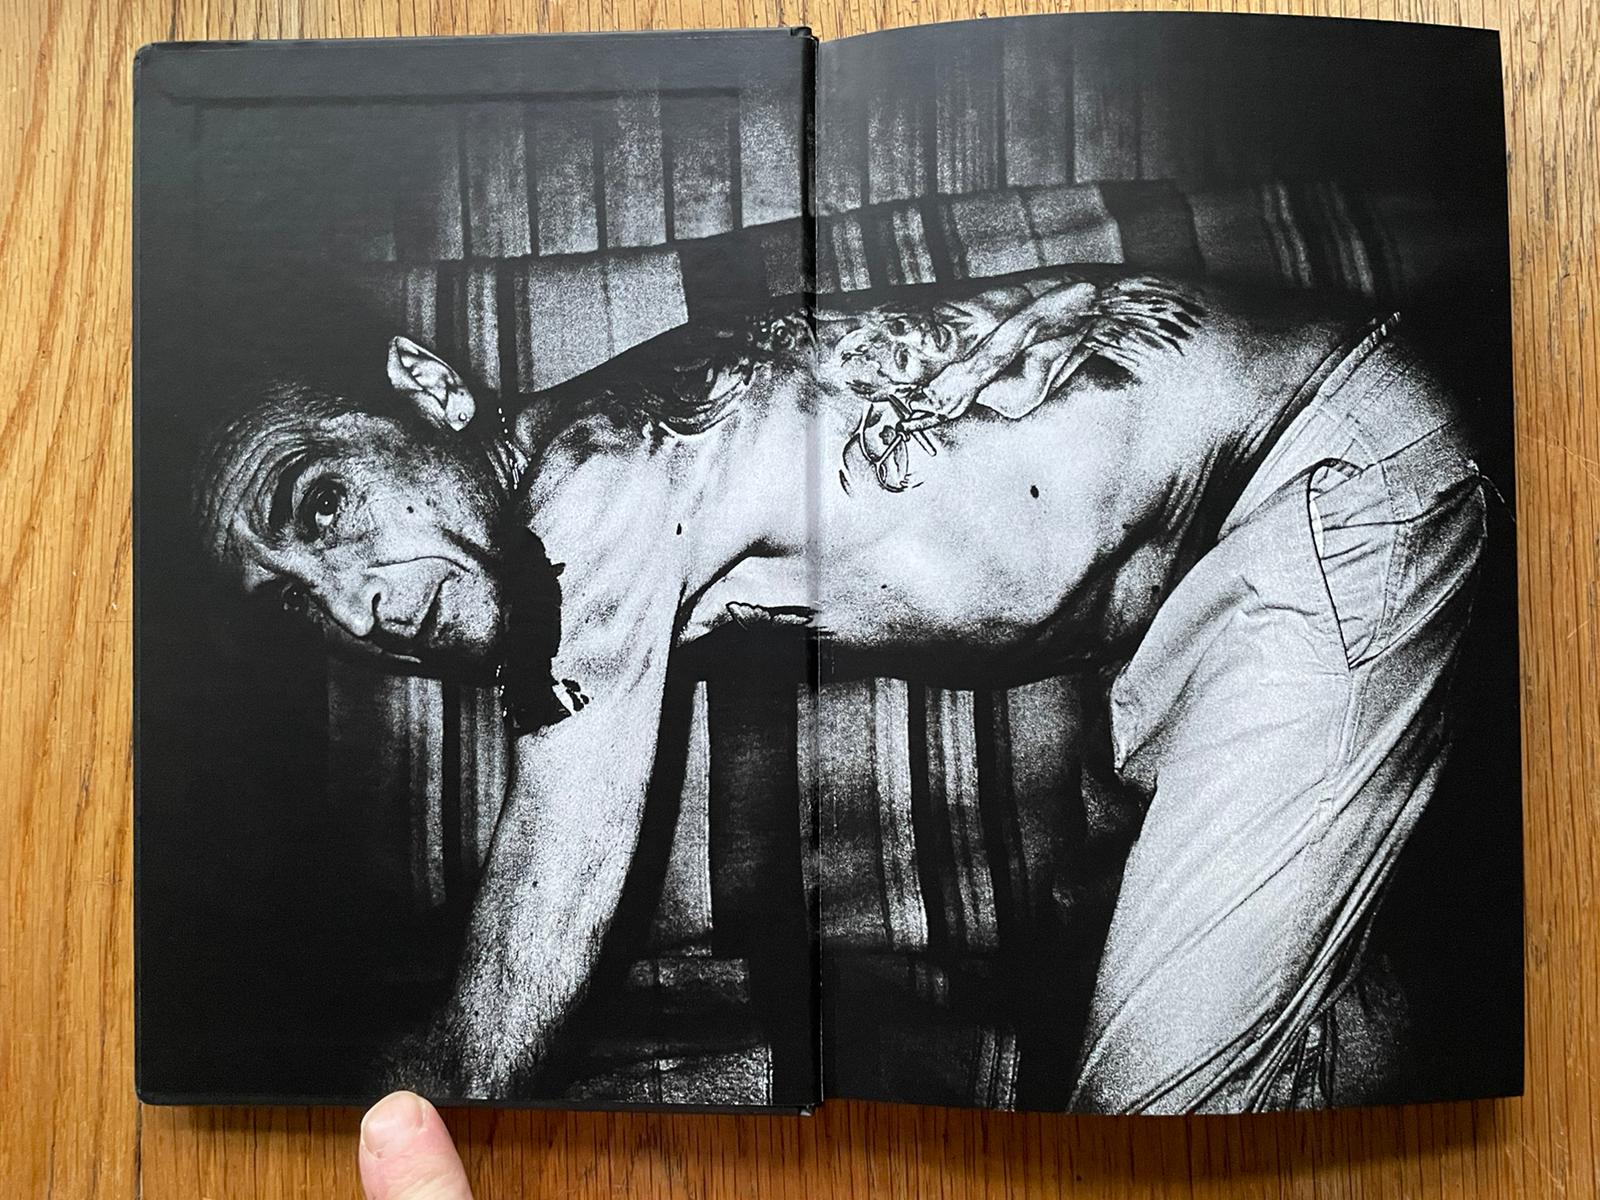 Buy Frenchkiss by Anders Petersen online – Setanta Books